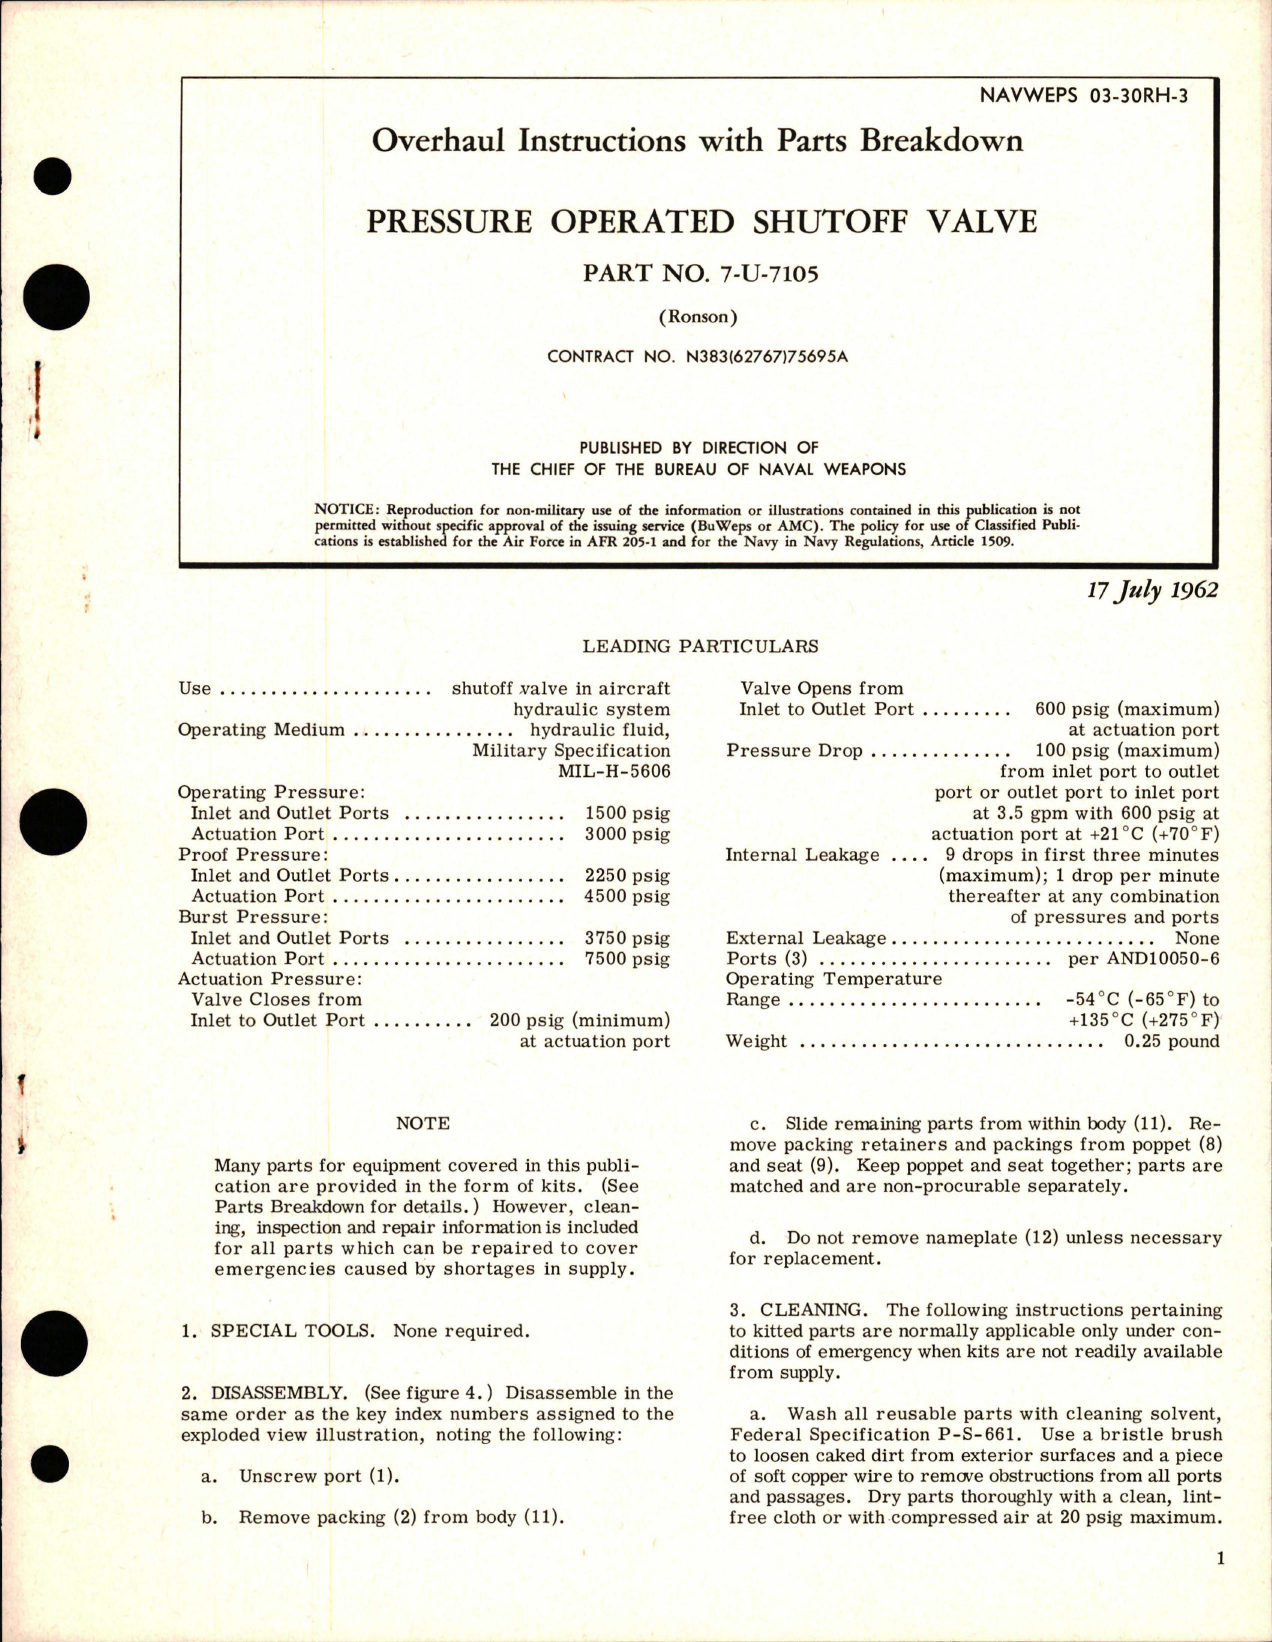 Sample page 1 from AirCorps Library document: Overhaul Instructions with Parts Breakdown for Pressure Operated Shutoff Valve - Part 7-U-7105 